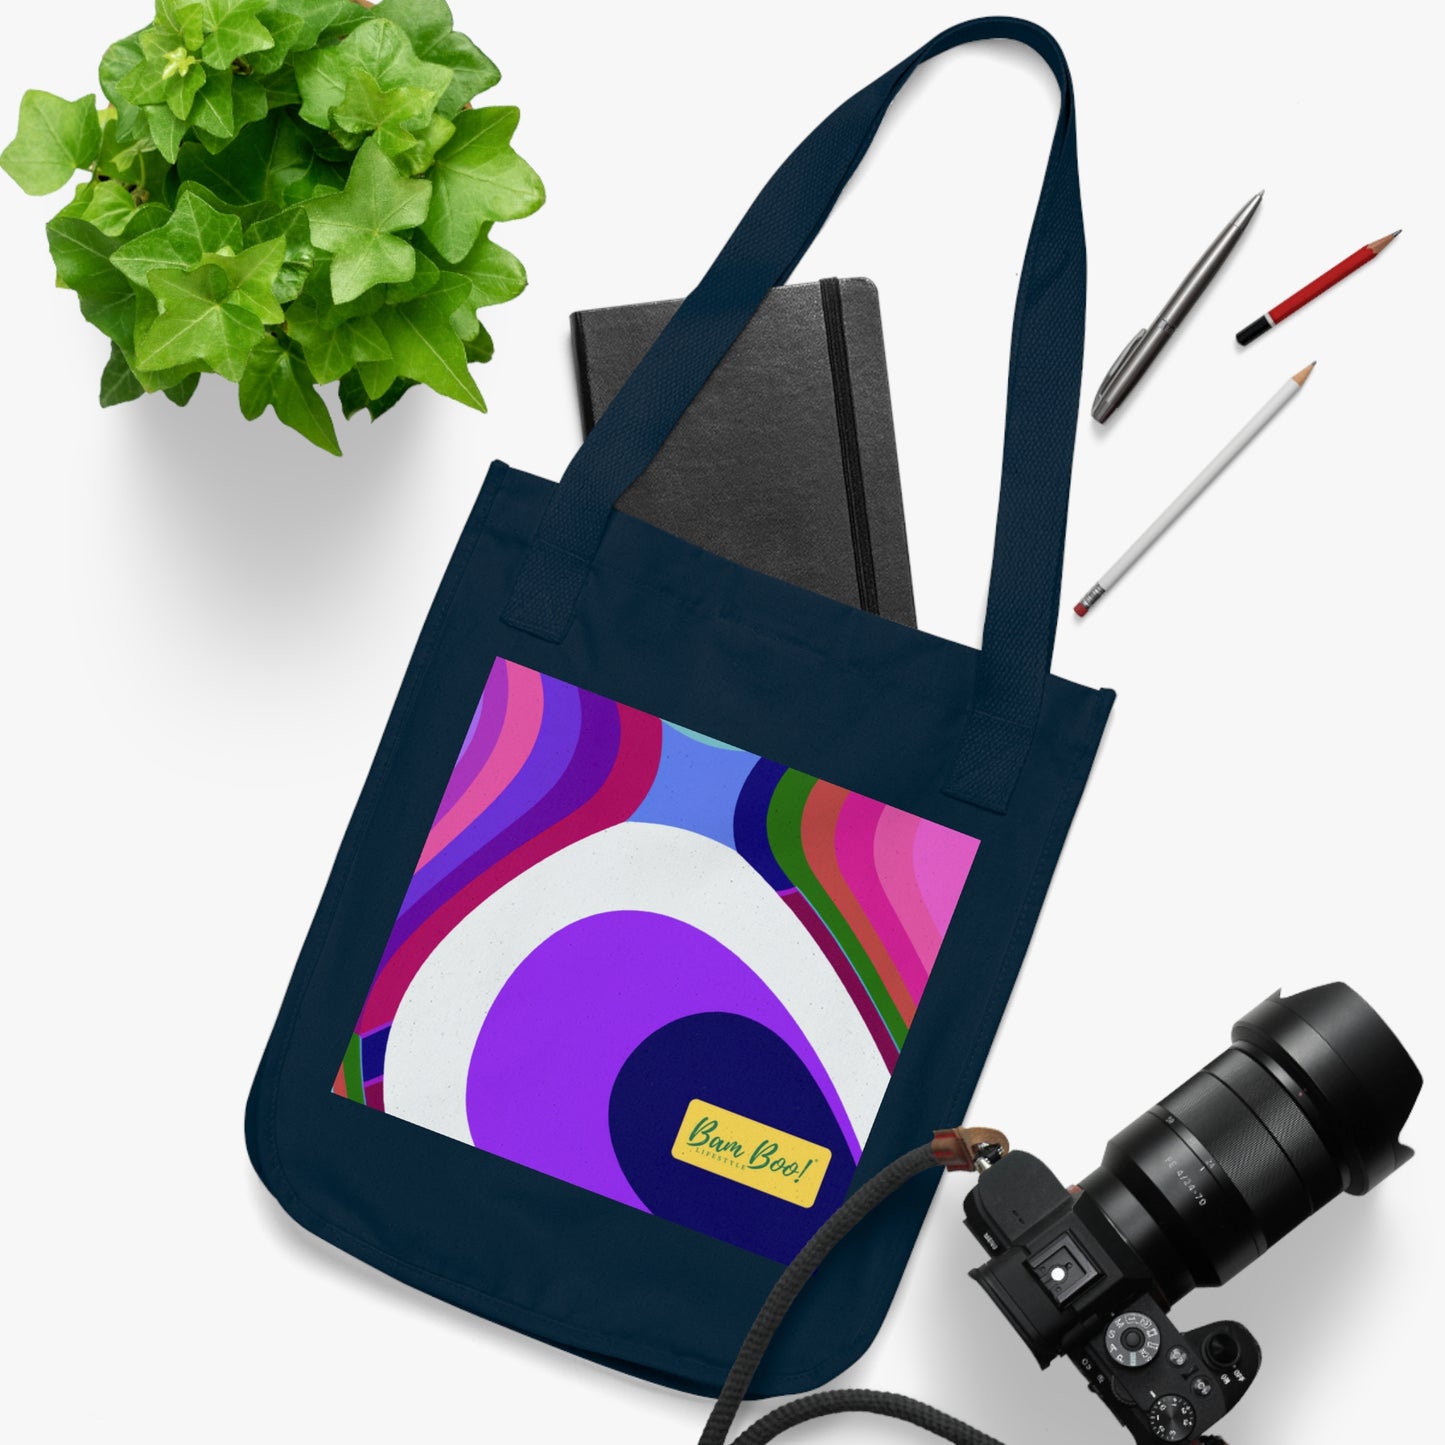 "The Art of My Perspective: An Expression of the World Through Shapes, Colors, and Patterns" - Bam Boo! Lifestyle Eco-friendly Tote Bag